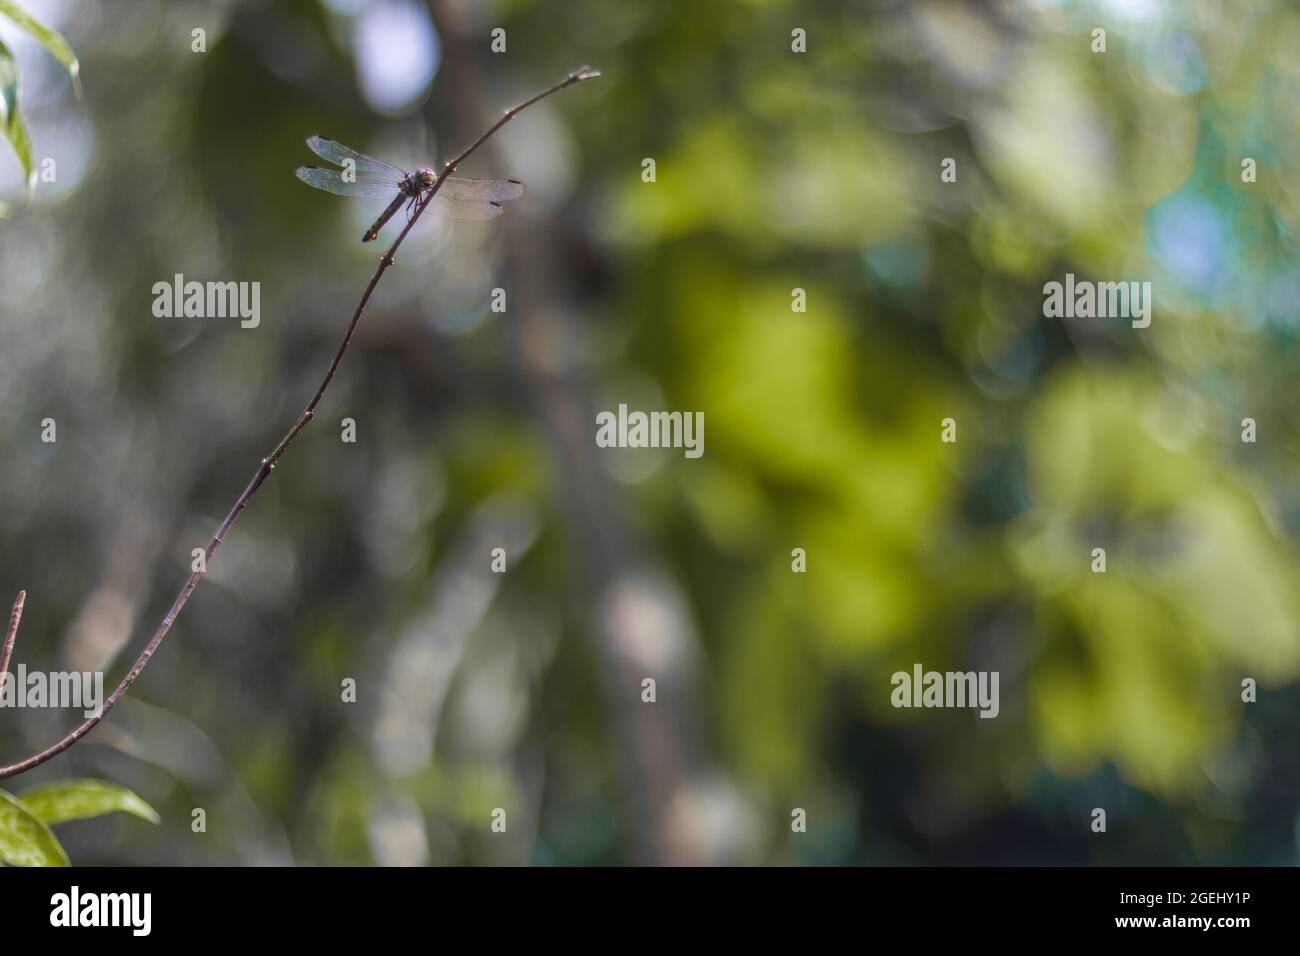 A dragonfly perched on a branch of a shrub in a field at noon Stock Photo